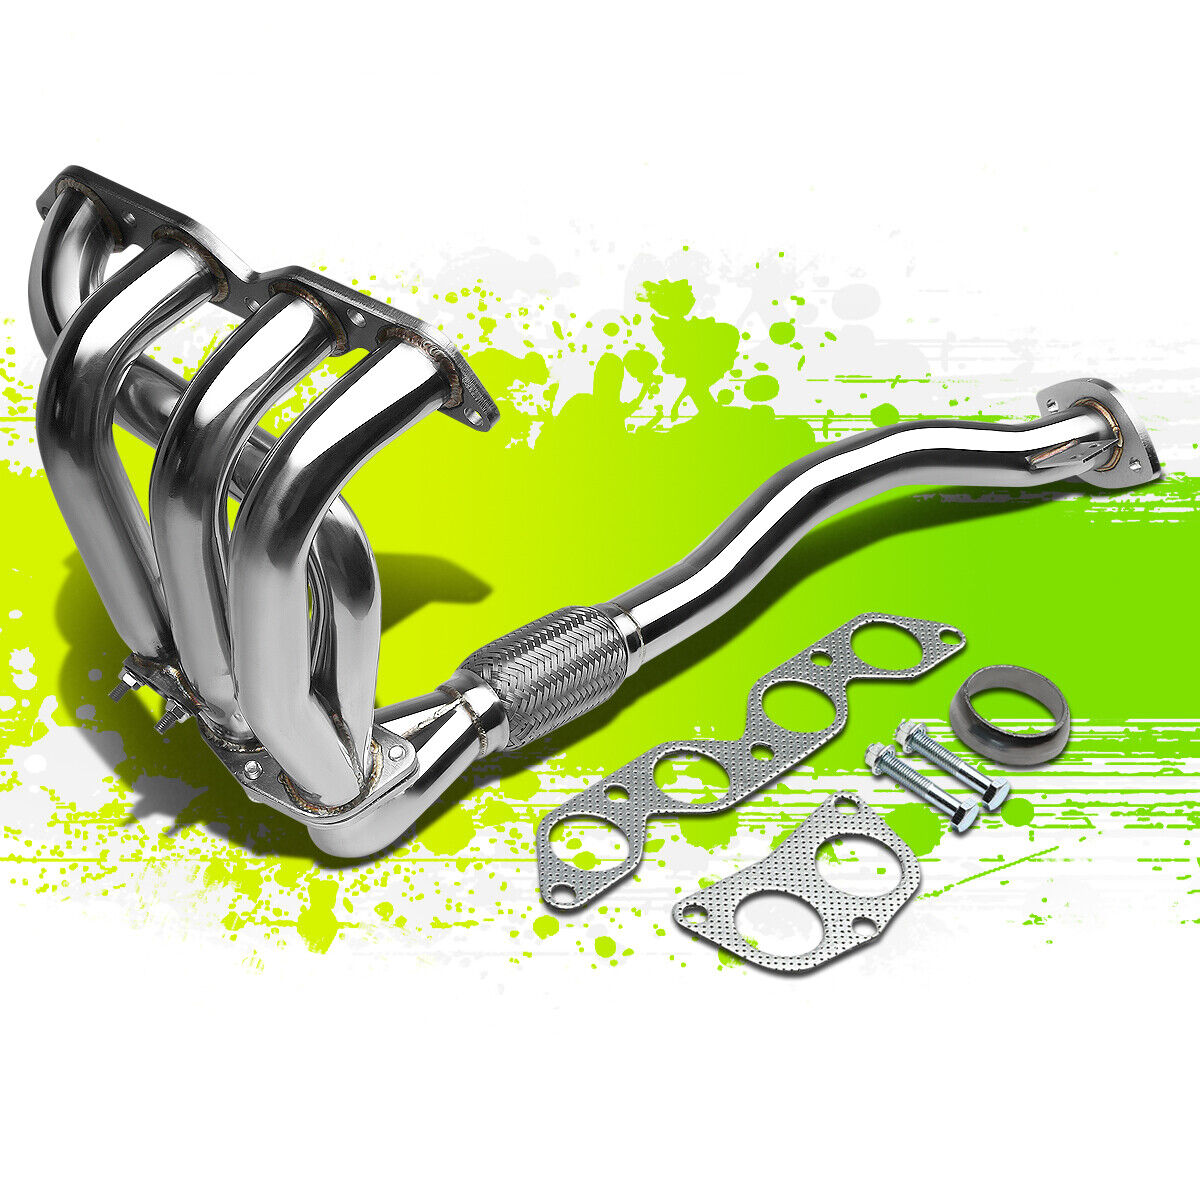 FOR 93-97 TOYOTA COROLLA 1.8L DX/LE E100/AE102 7A-FE 4-2-1 RACING EXHAUST HEADER